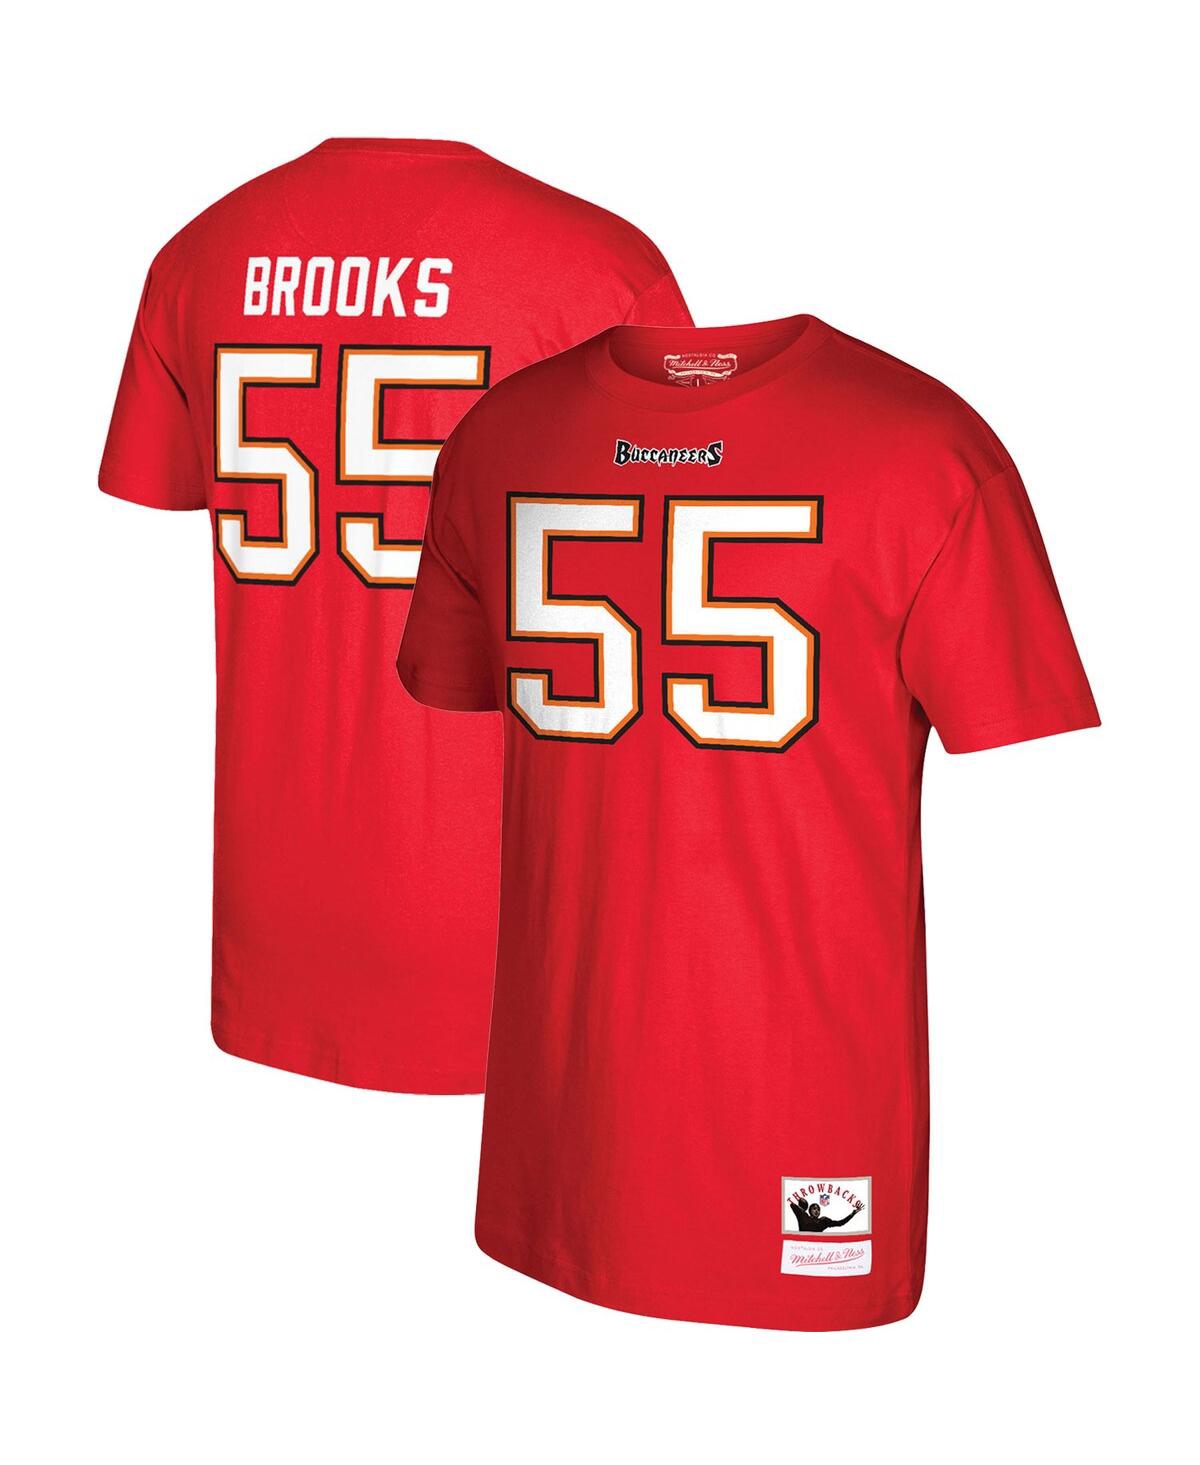 MITCHELL & NESS MEN'S MITCHELL & NESS DERRICK BROOKS RED TAMPA BAY BUCCANEERS RETIRED PLAYER NAME AND NUMBER T-SHIRT